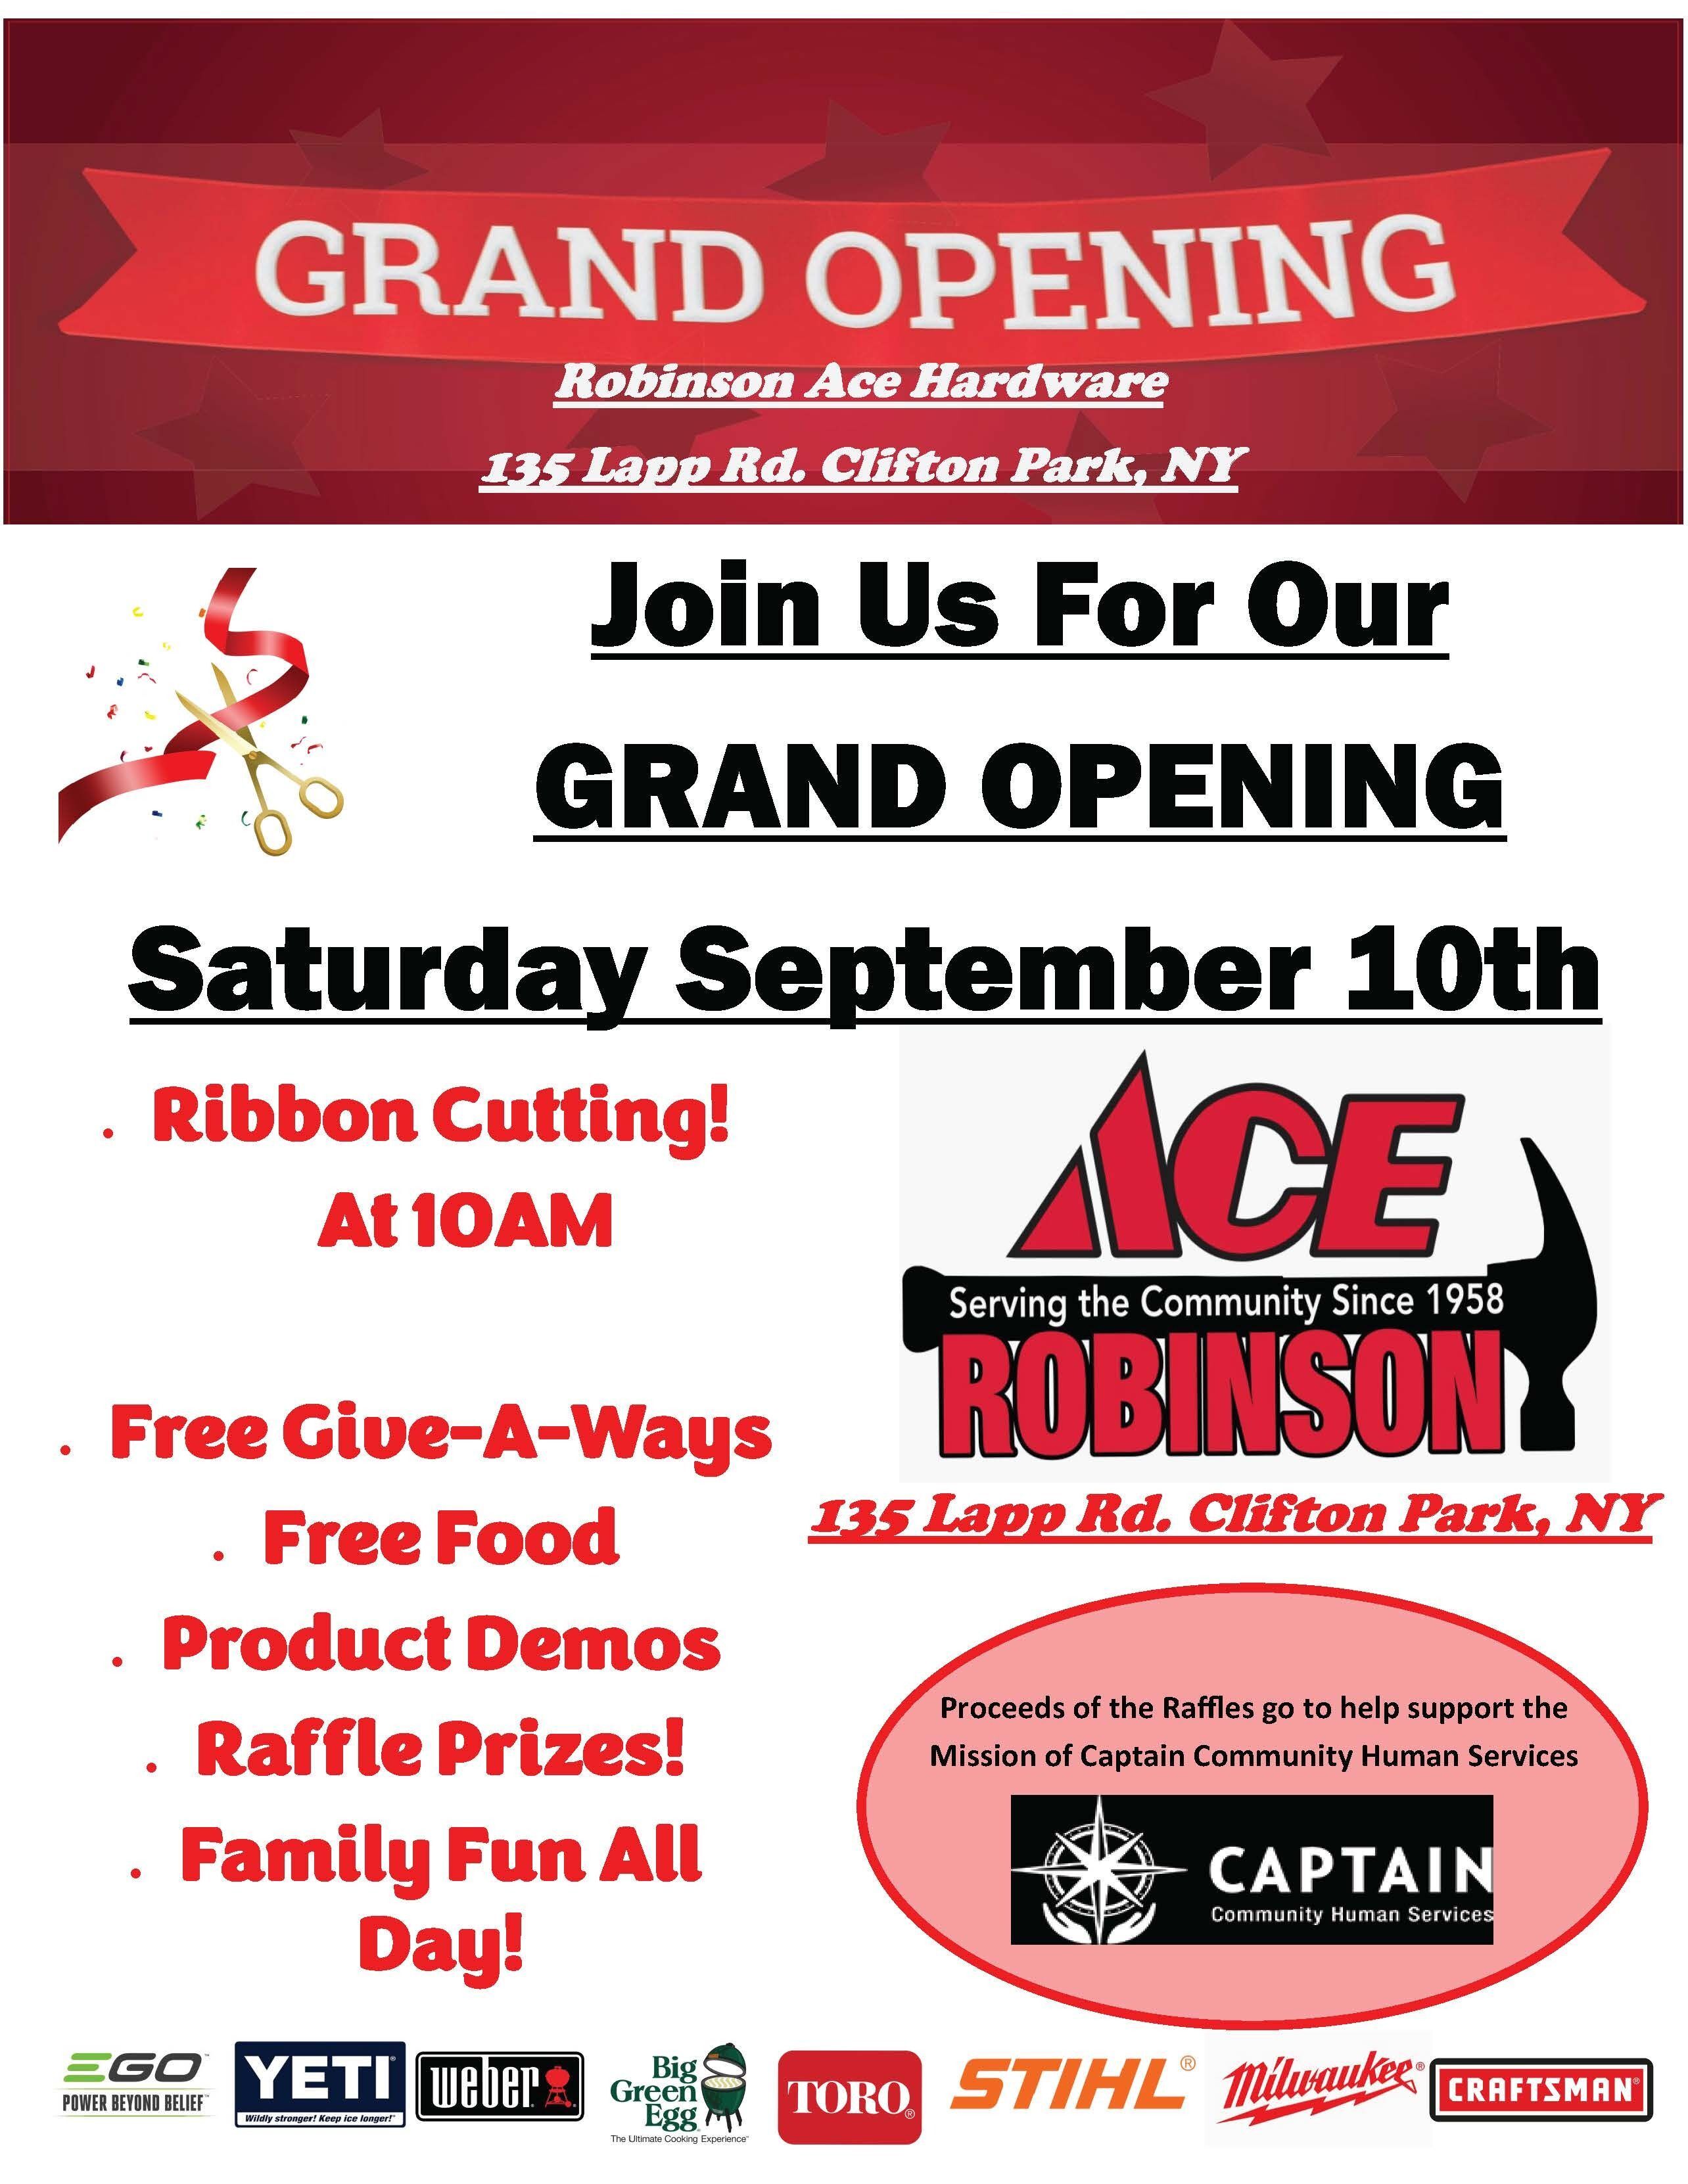 Robinson Ace Hardware Grand Opening to Support CAPTAIN CHS